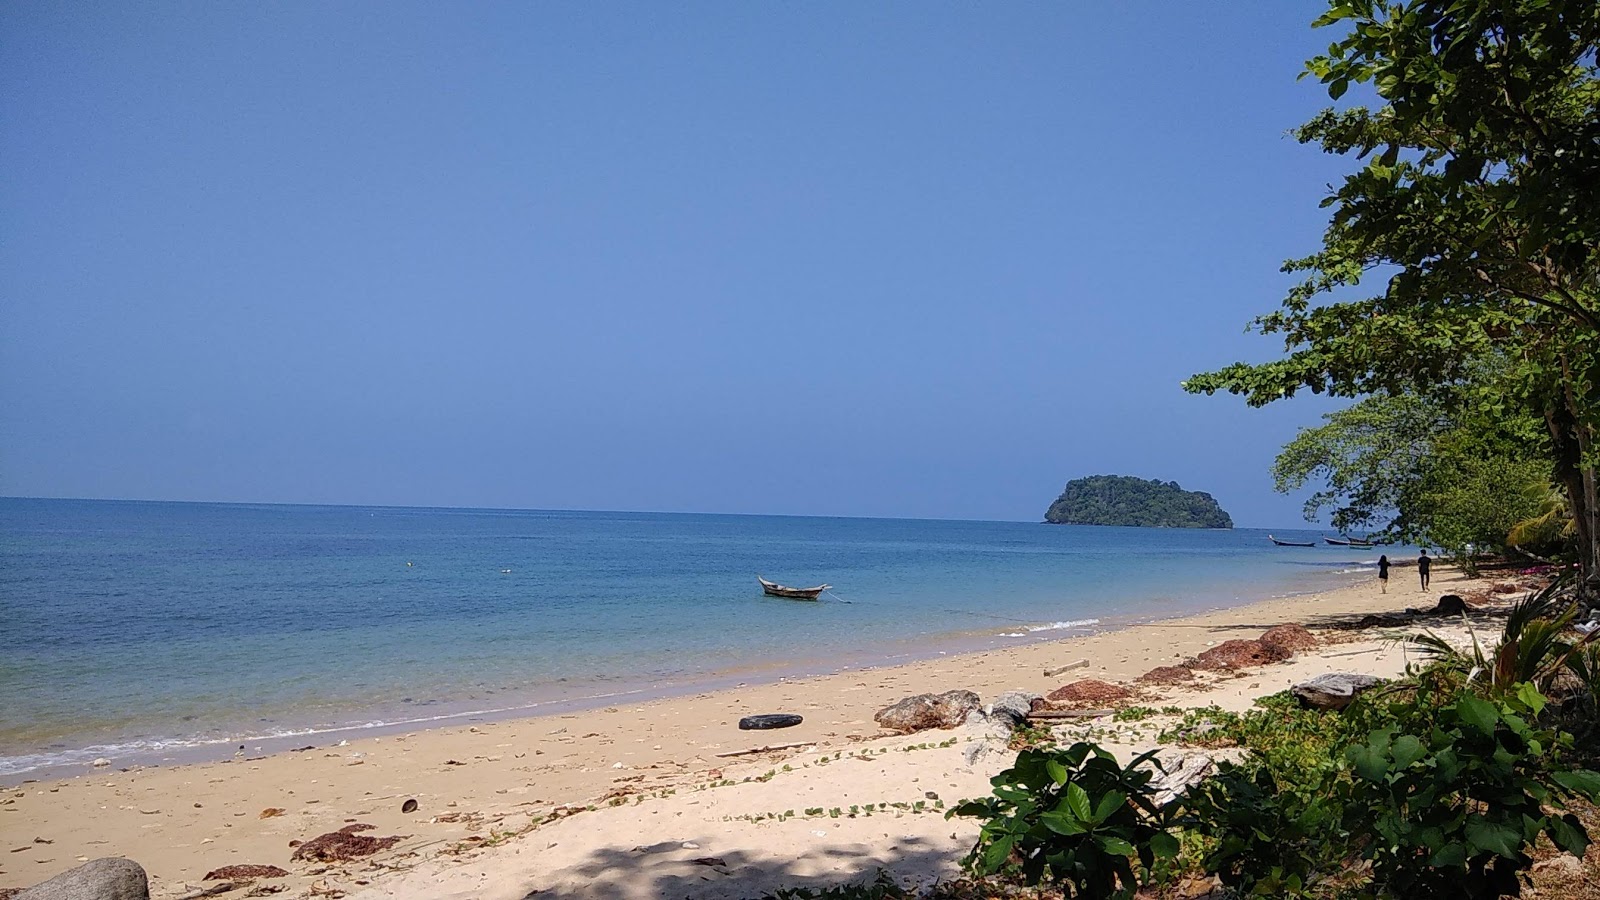 Photo of LangKhao Beach with bright sand & rocks surface